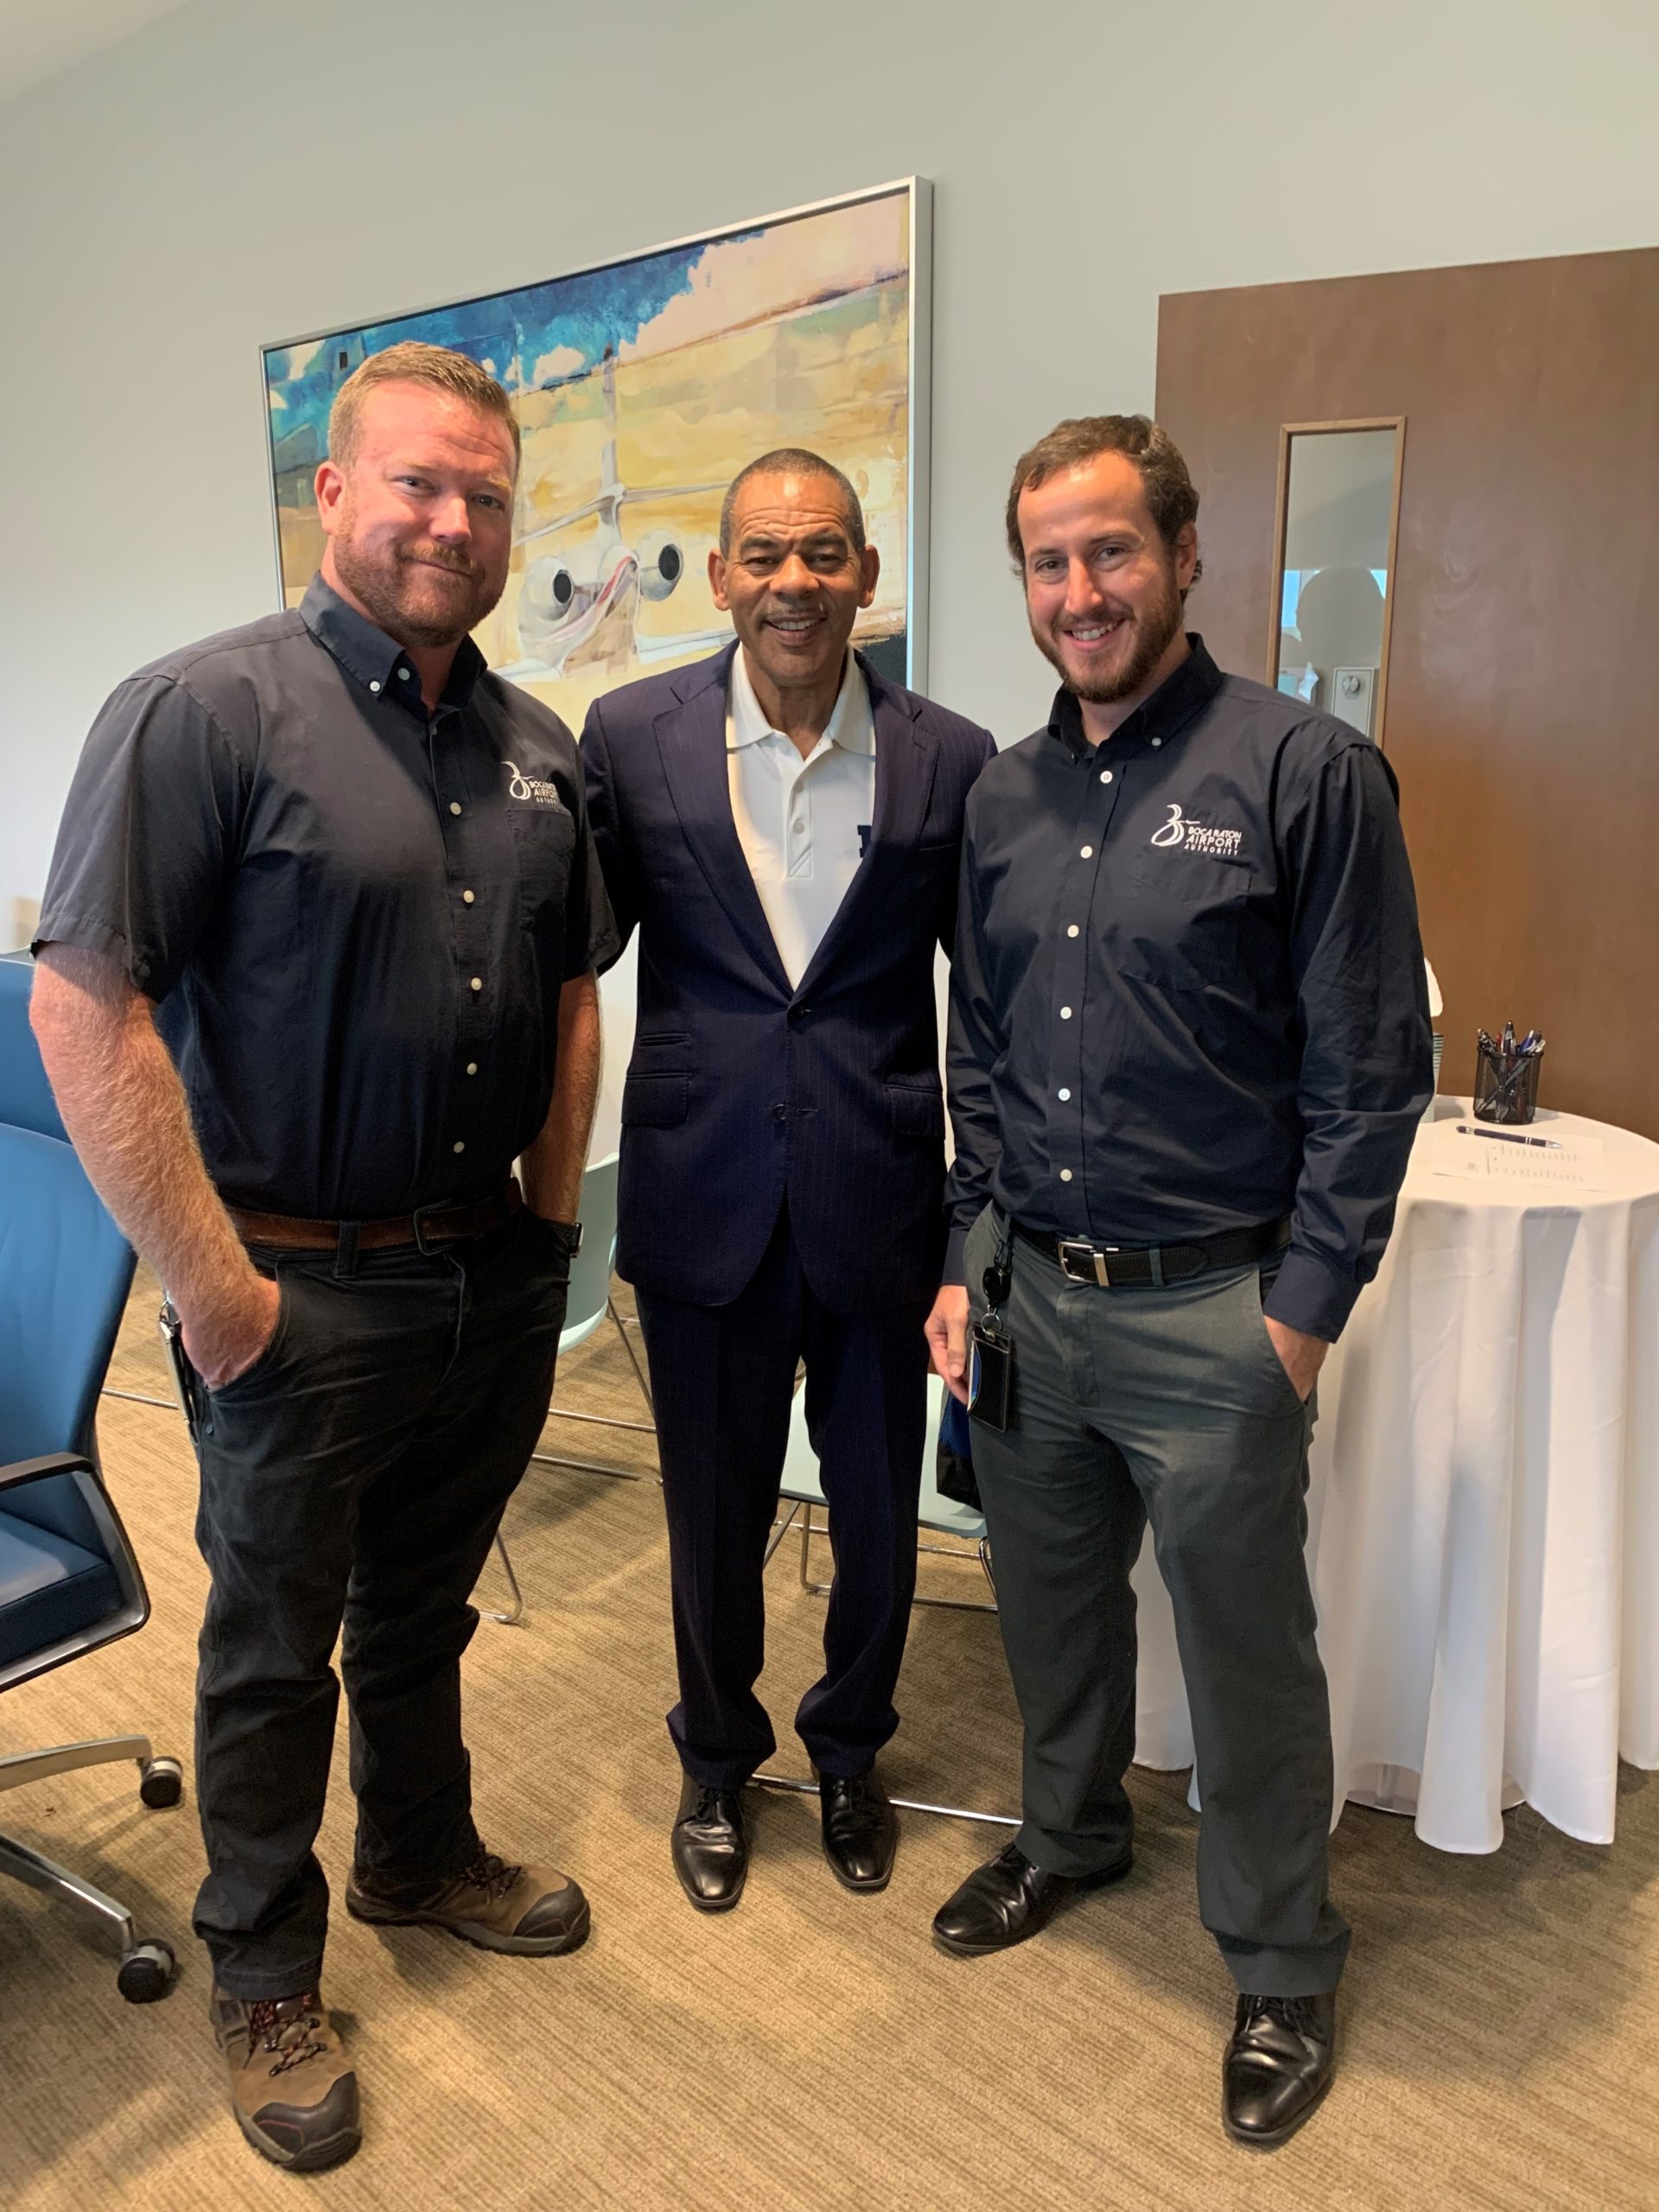 Pictured are Boca Raton Airport Authority Operations Director Travis Bryan, NBC 6 News Anchor Willard Shepard, and Finance and Administration Manager Robert Abbott.